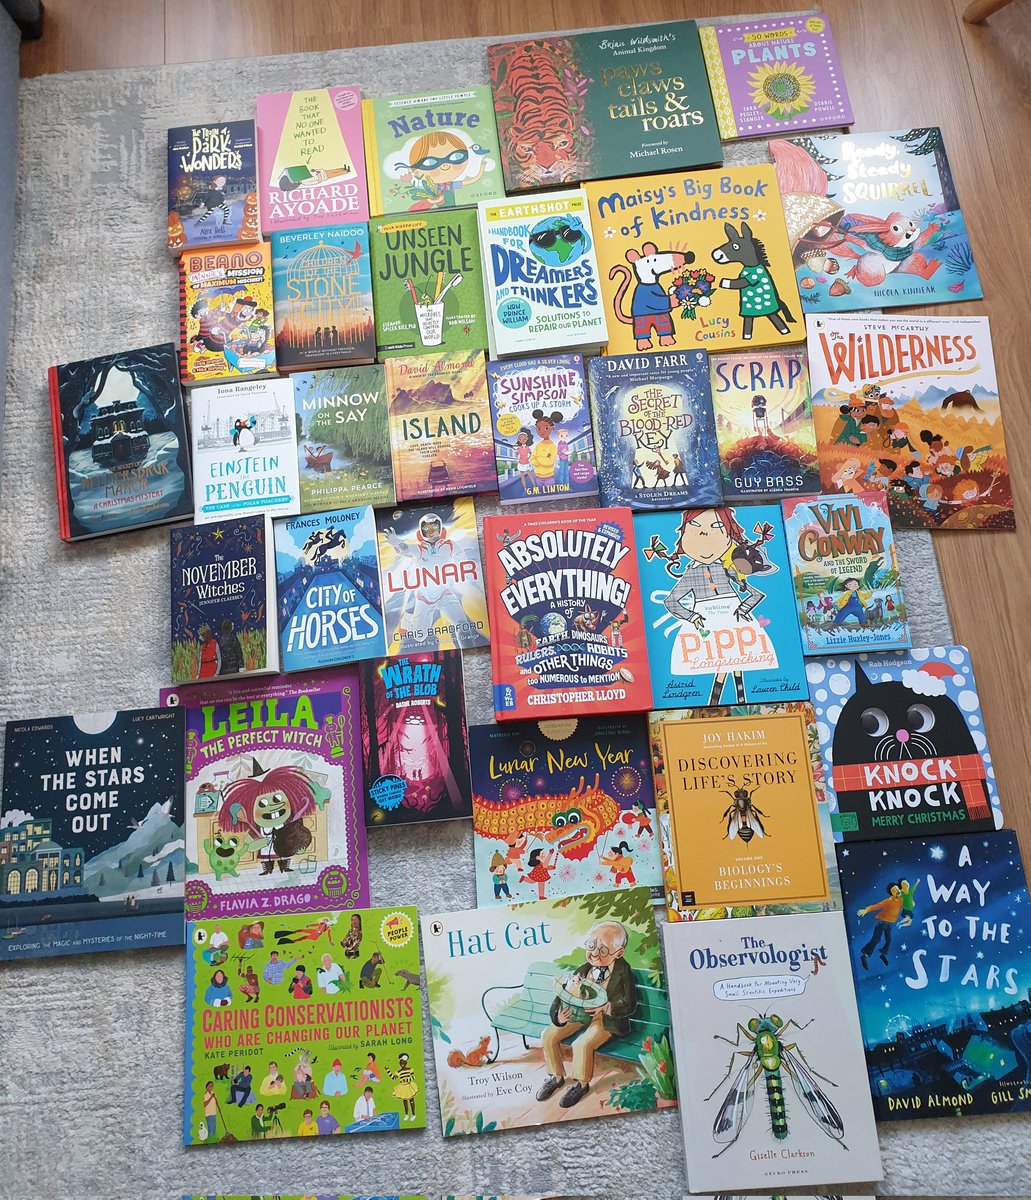 OMG @imaginecentre didn't even know I'd won!Love your super book recommendations & reviews,the range & quality of books you offer, the amazing prices. Now, your generosity has blown me away!Our library will be so much richer!🙏🎁🎄 #readingforpleasure #primaryteacher #edutwitter